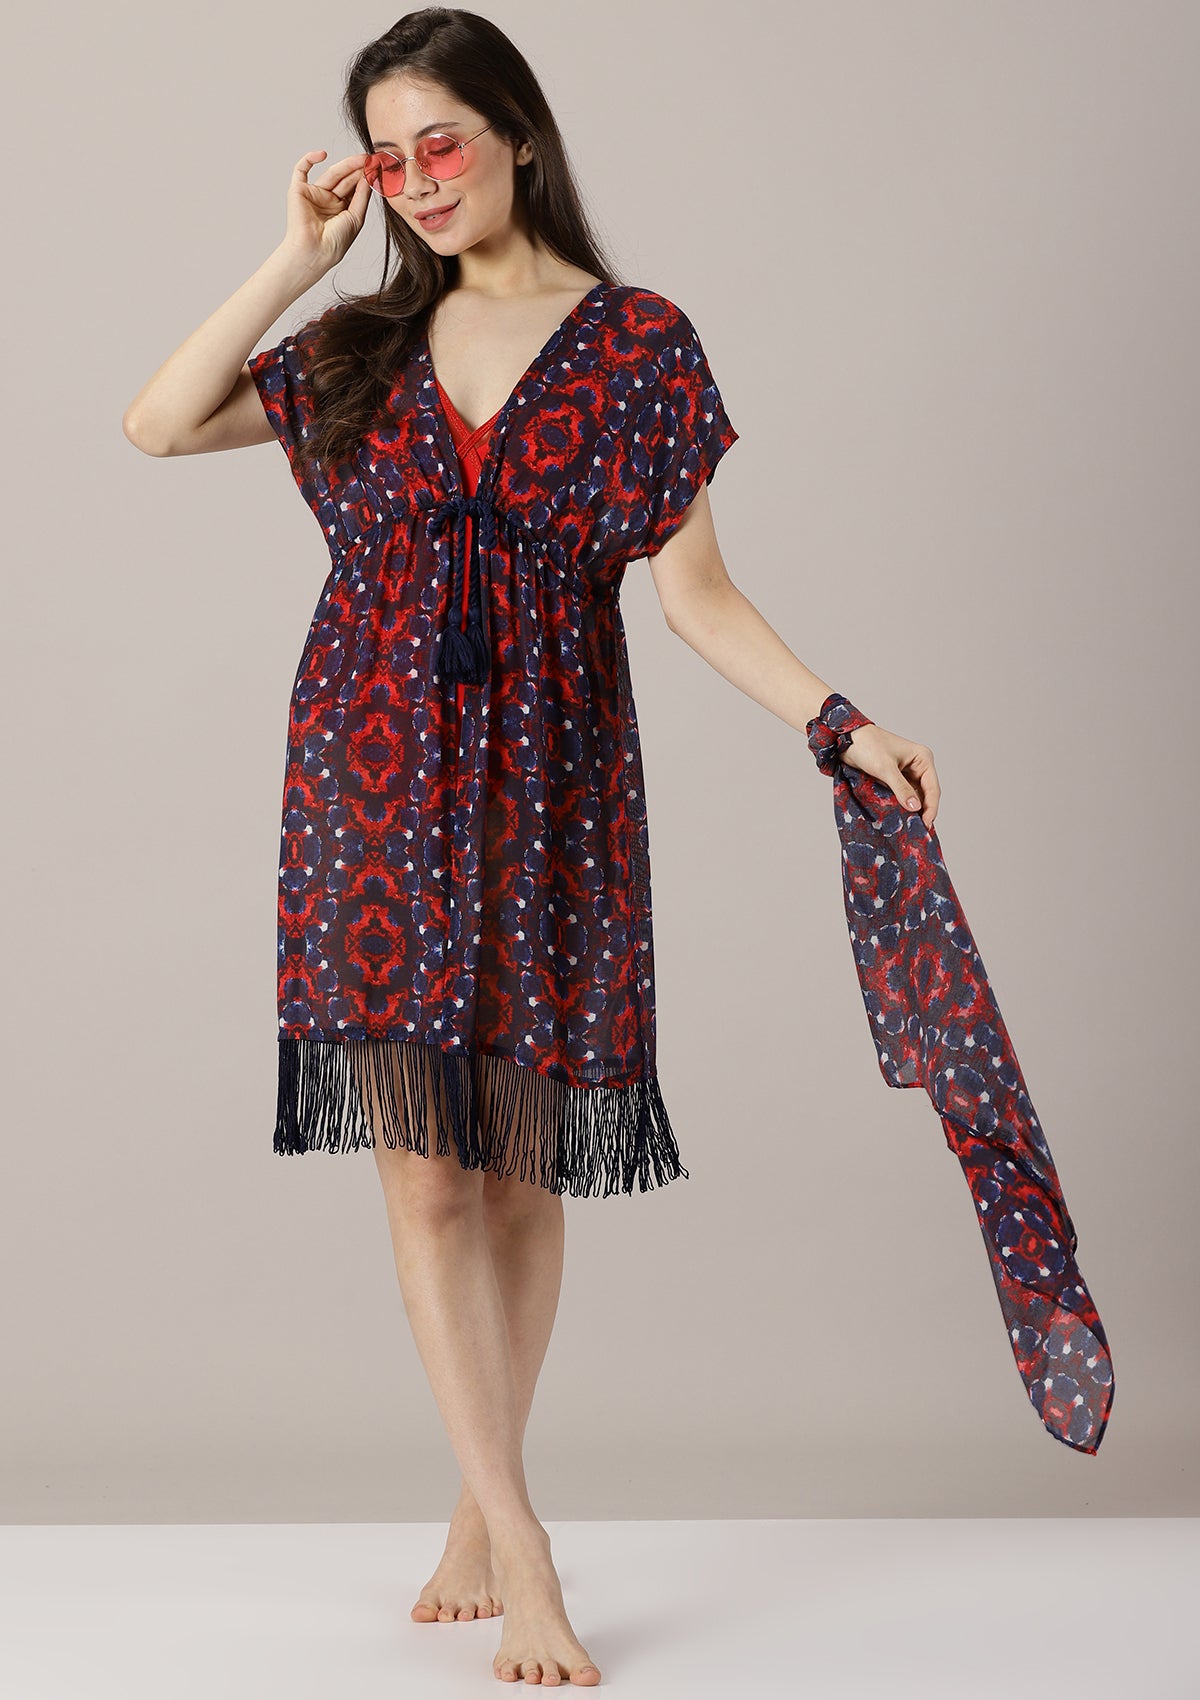 Shimmy - Blazing Hot Cover-up - IshqMe